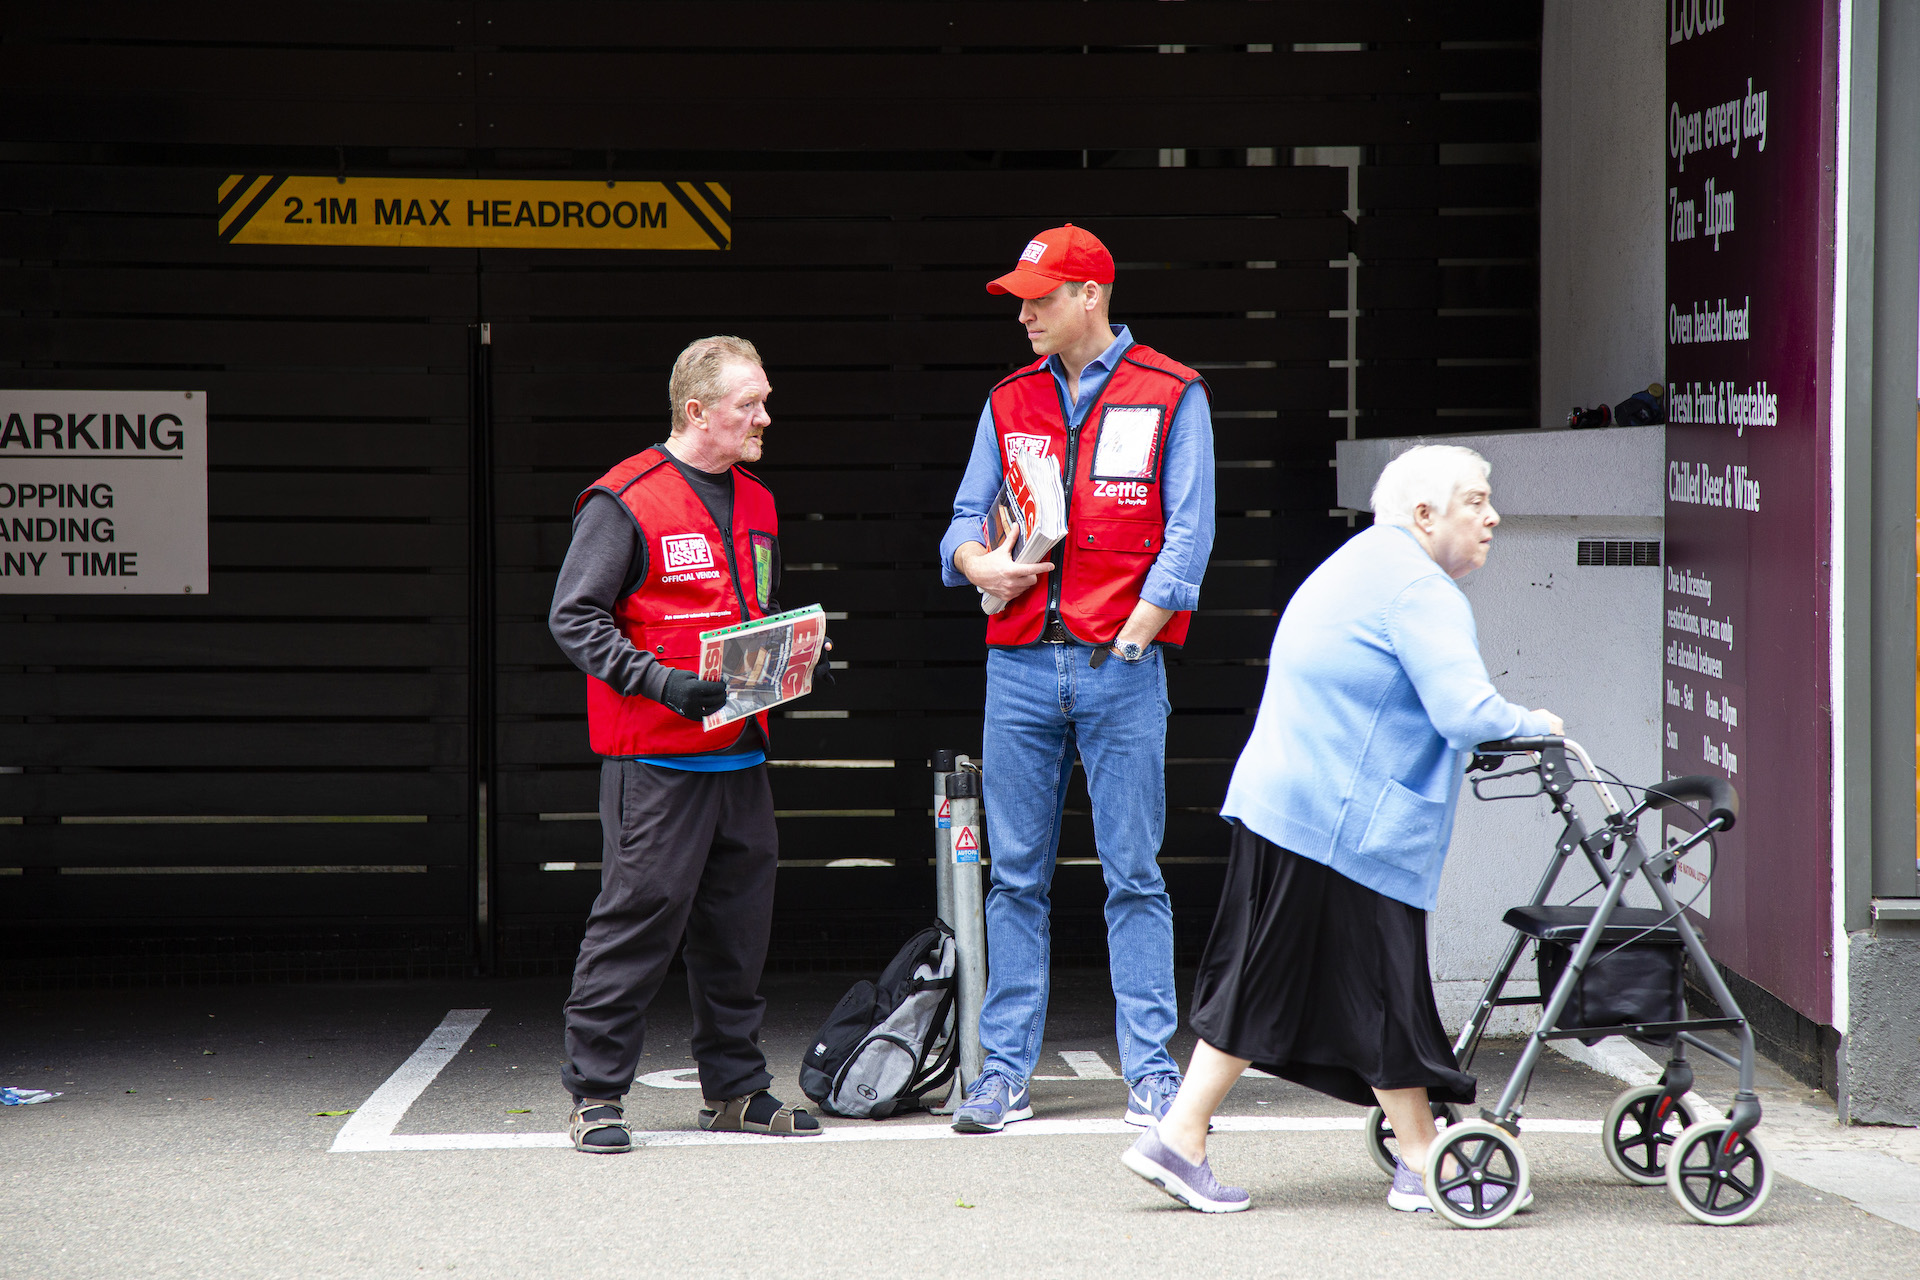 Prince WIlliam and Big Issue seller Dave Martin in red Big Issue hats and tabards stand in conversation as an elderly woman walks past